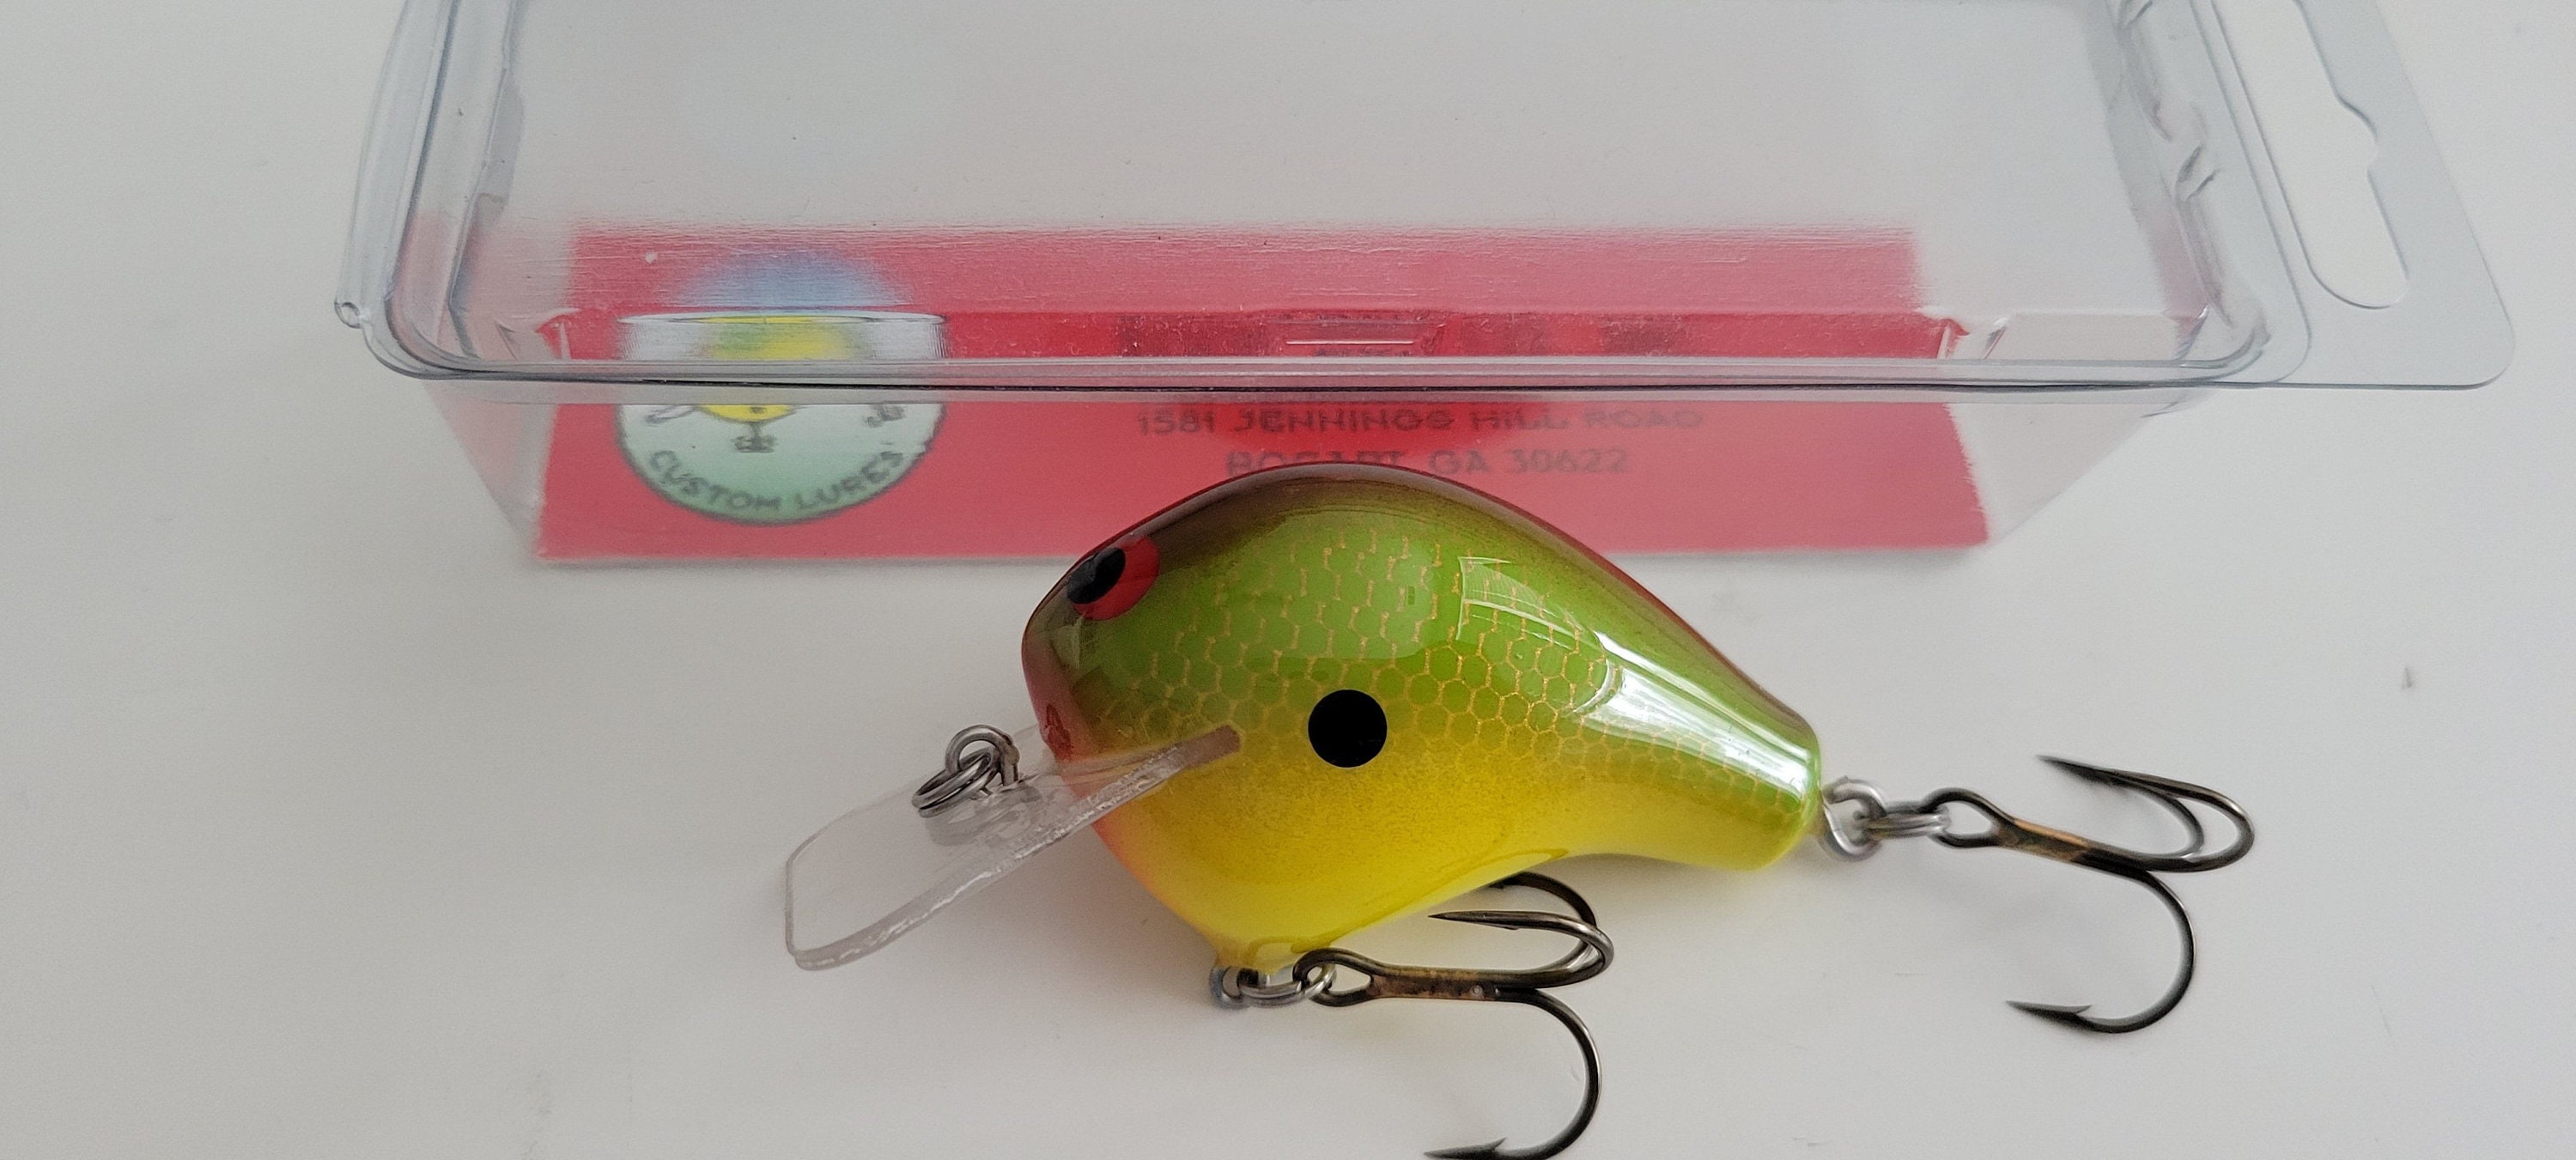 Wec Crankbaits For Sale Sale Clearance